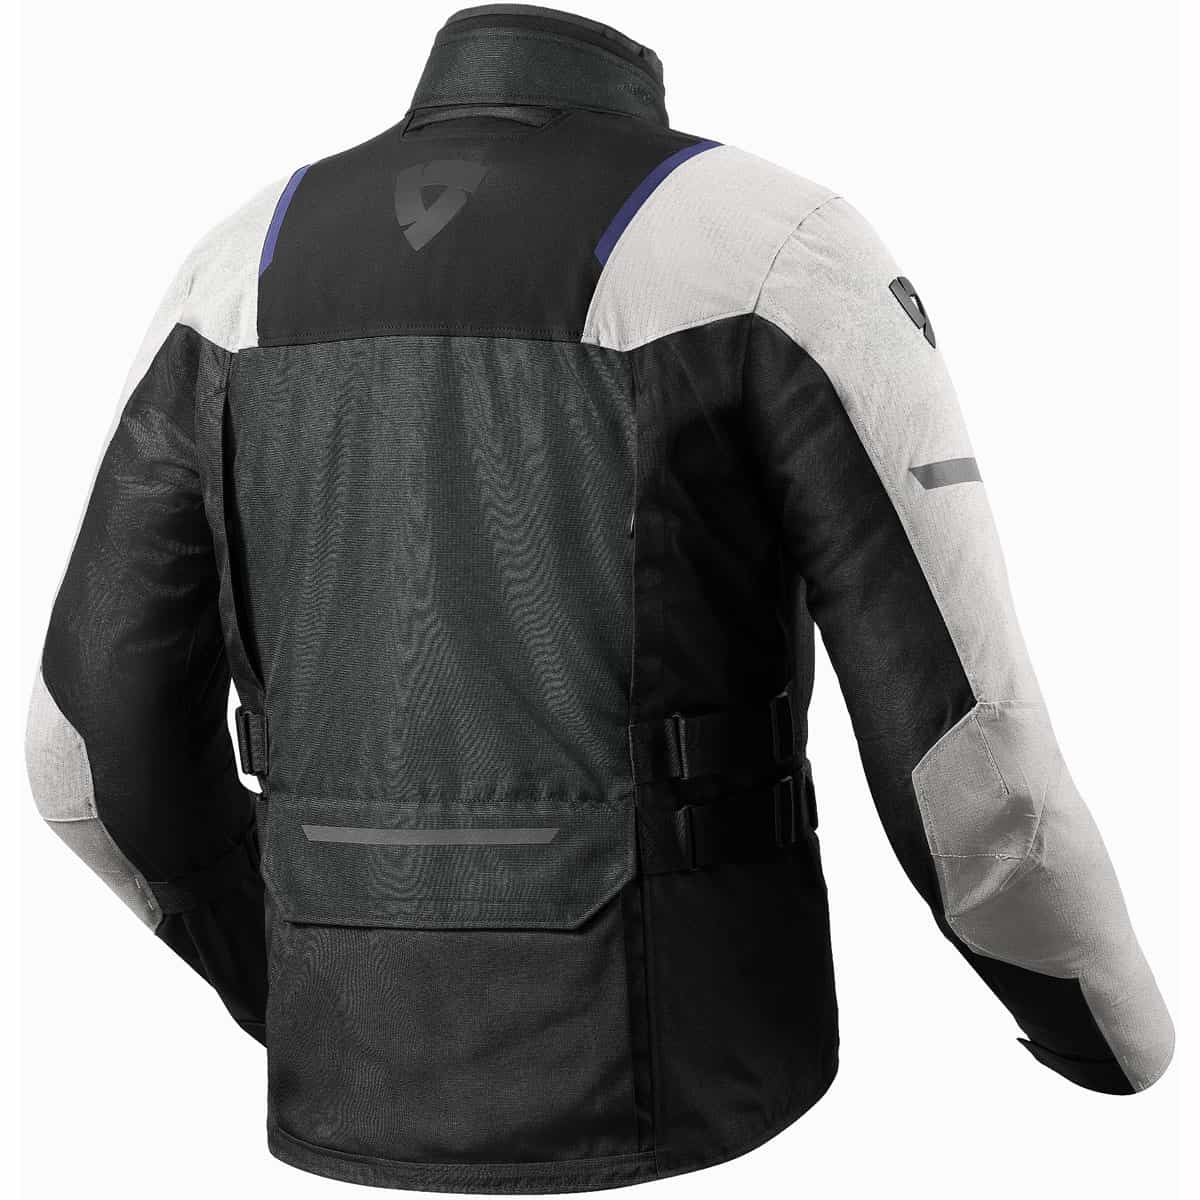 Rev It! Offtrack 2 H2O motorcycle jacket: The ultimate 3-layer adventure riding jacket- back